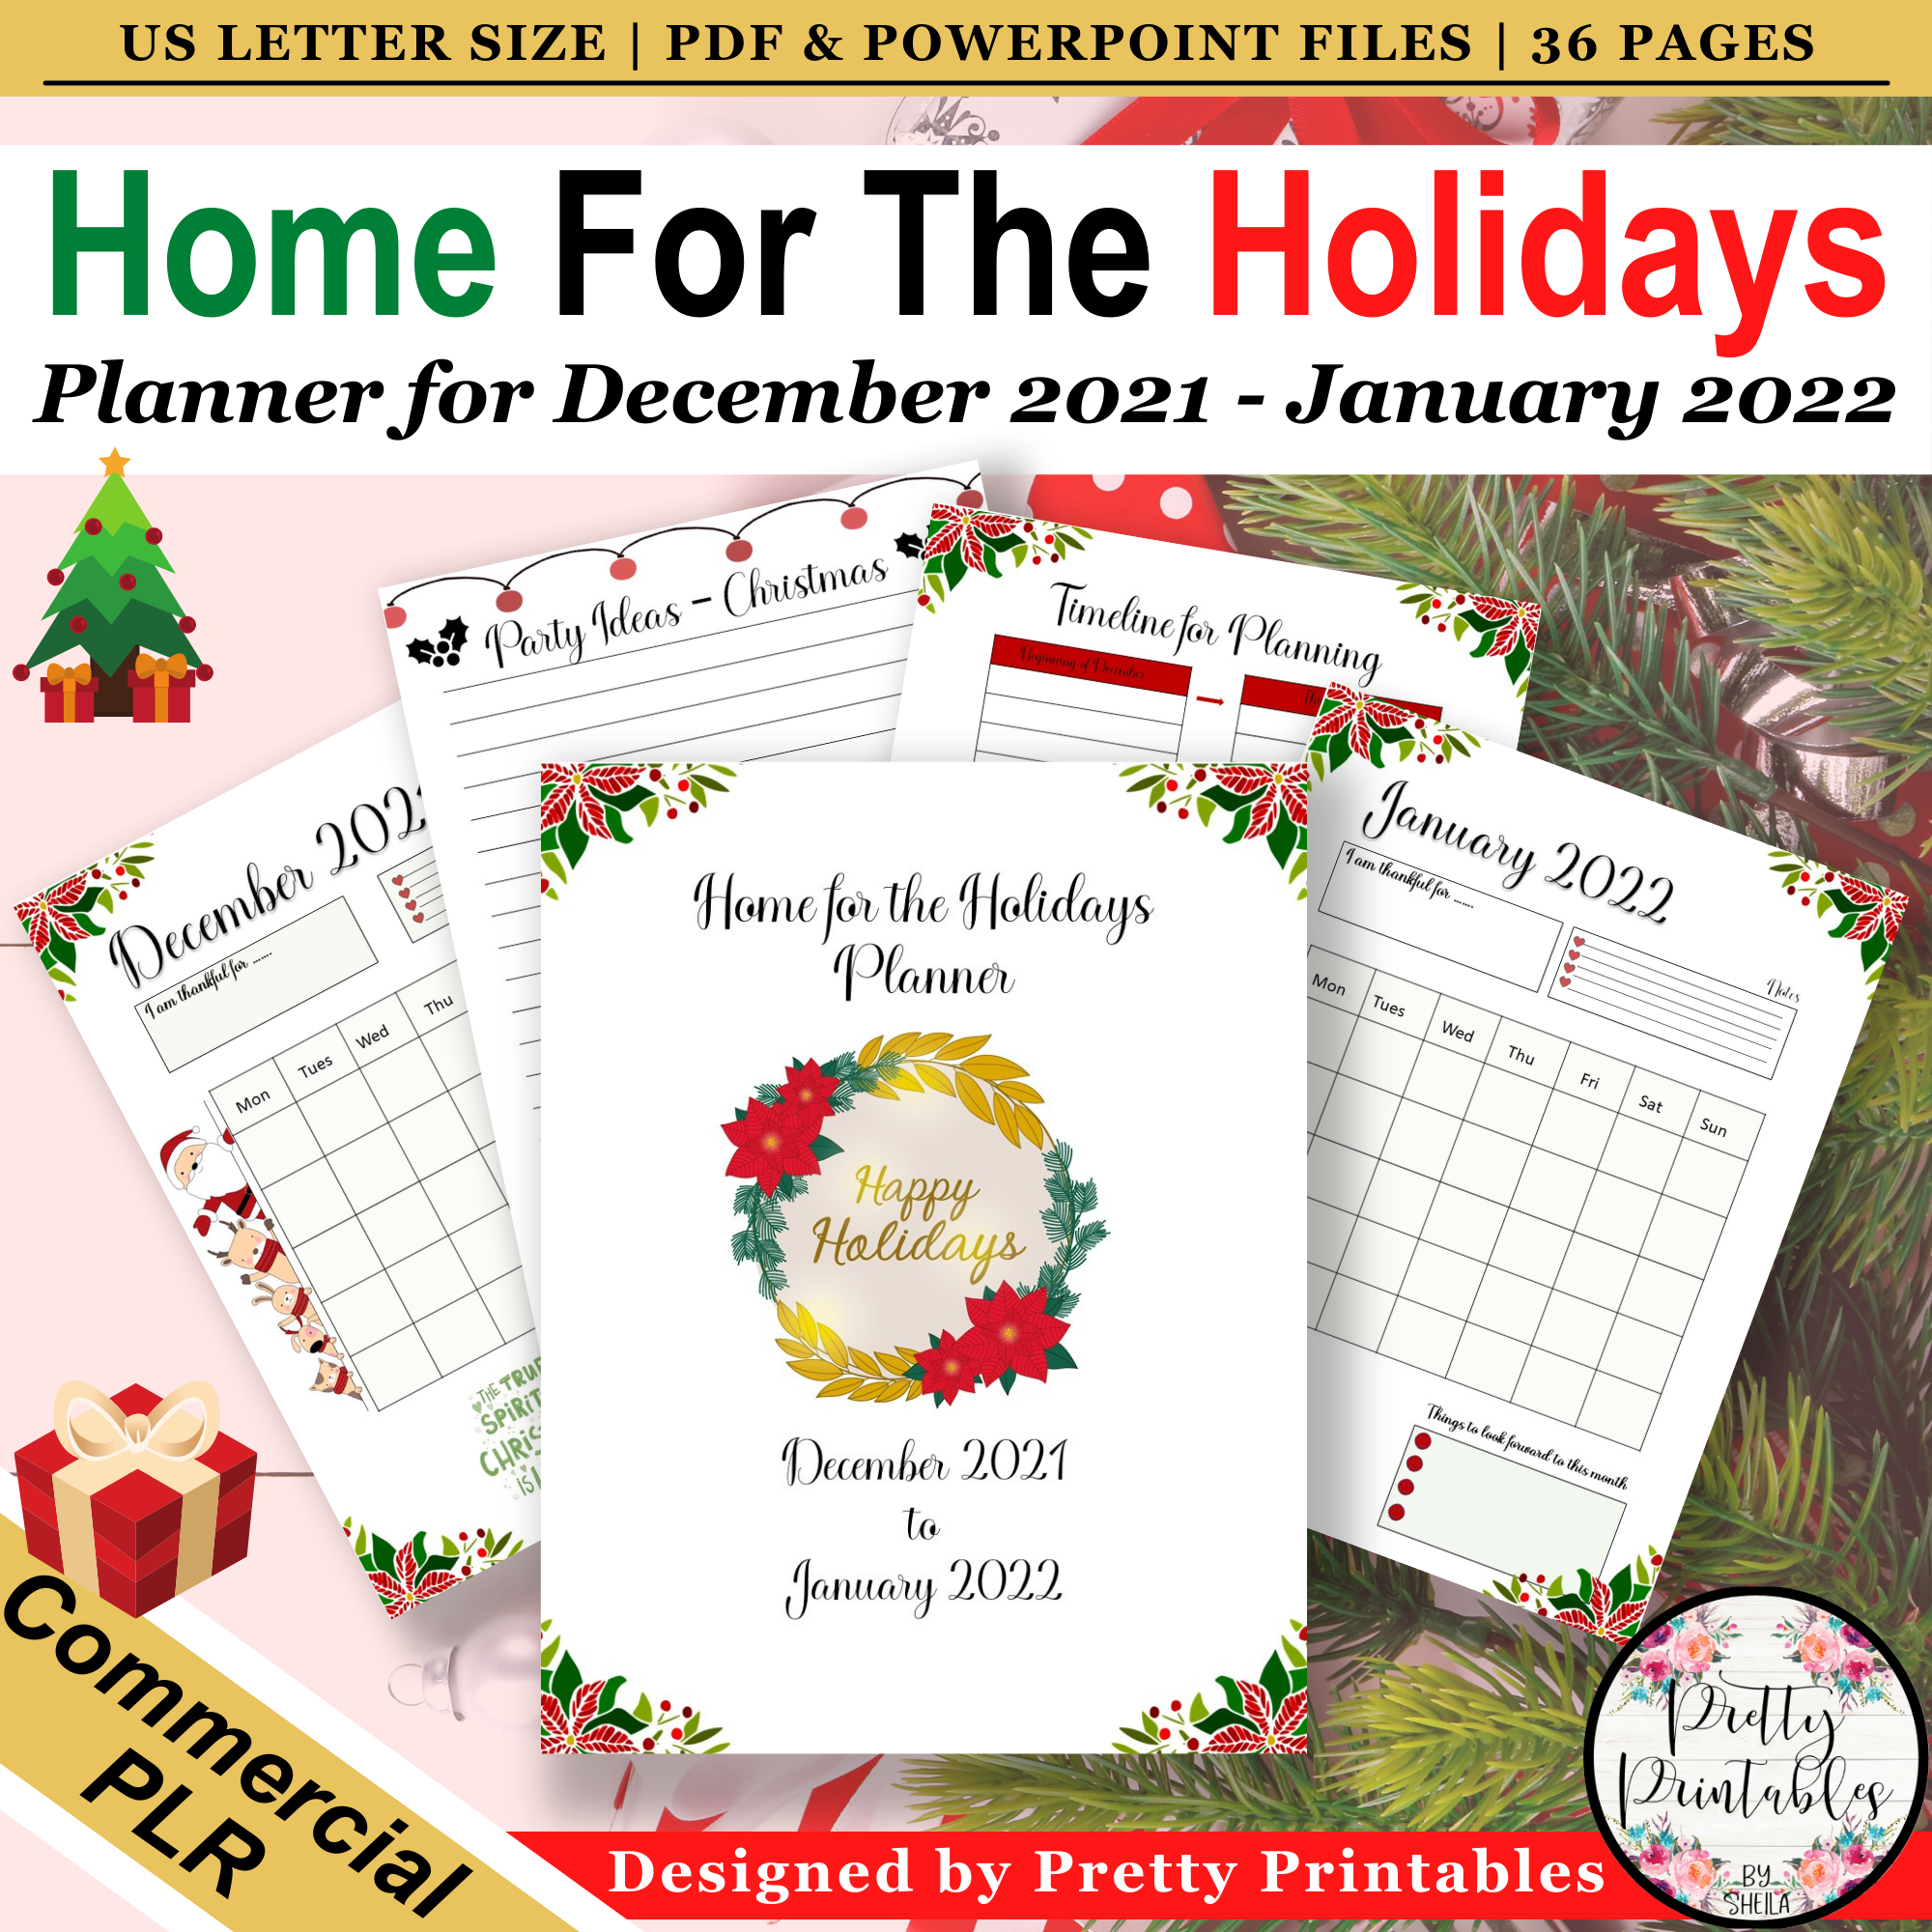 Home for the Holiday Planner for Christmas & New Year’s Commercial PLR Template